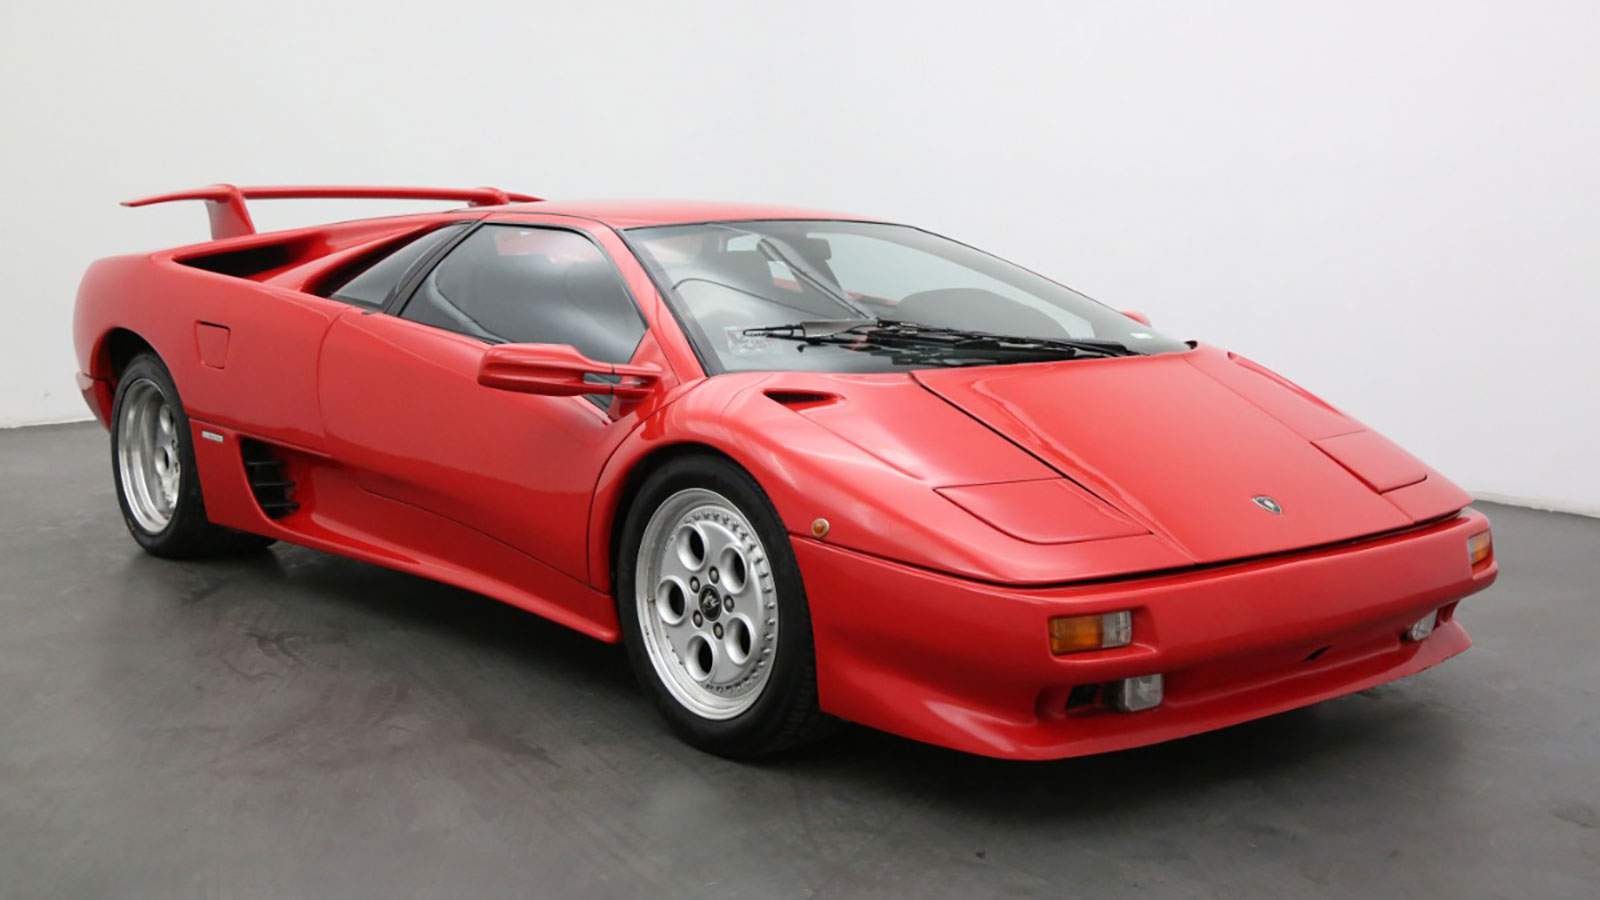 The Lamborghini Diablo featured in the James Bond film Die Another Day is for sale